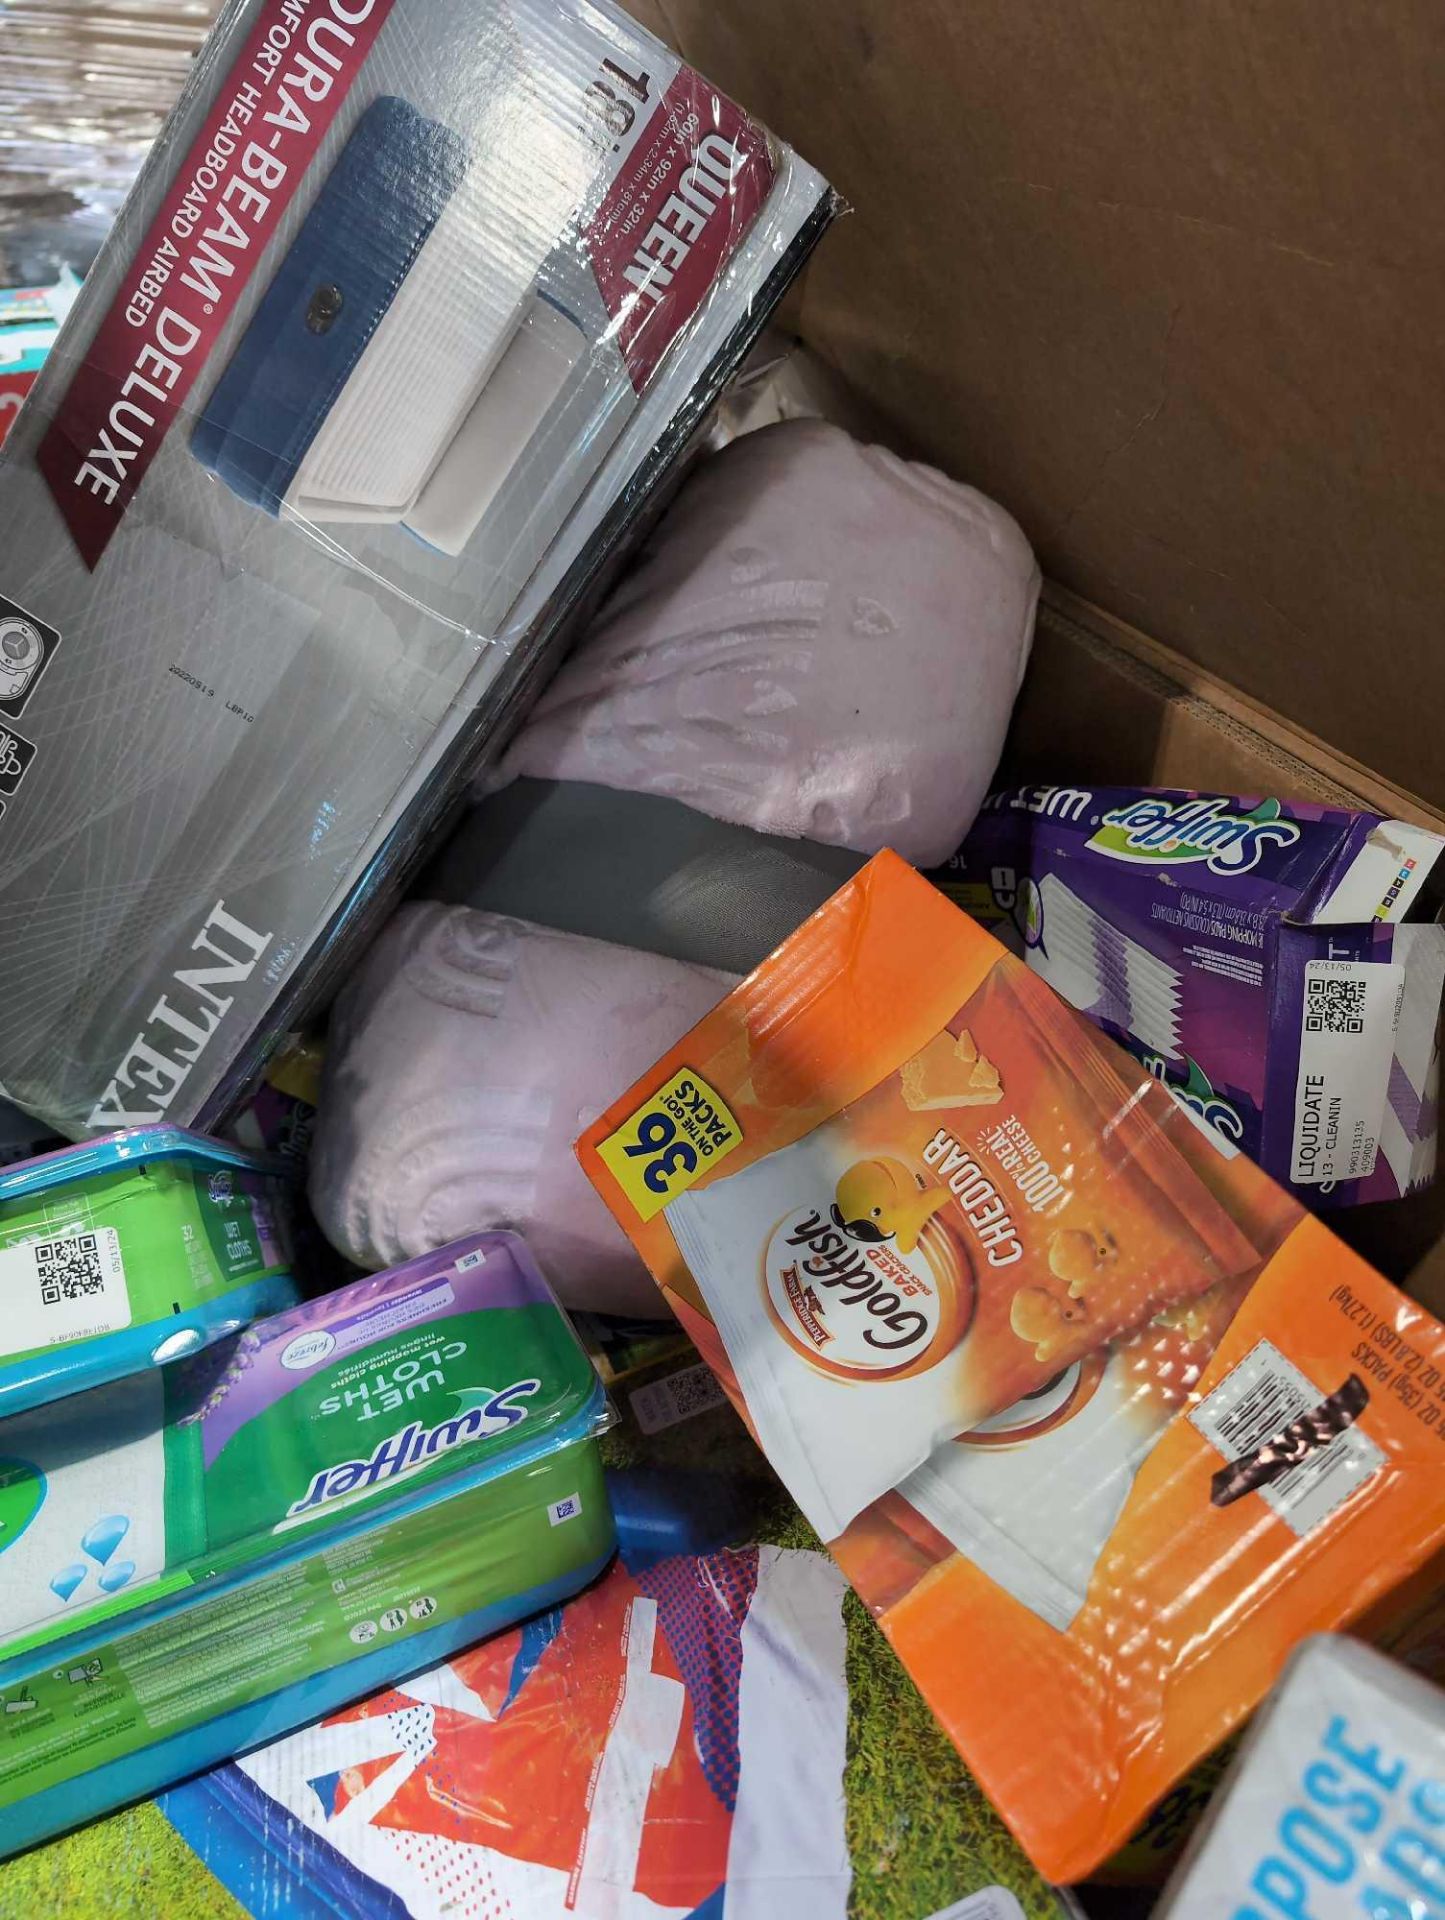 Big box store in a box, pampers, Sheets, Blanket, Intex blow up bed, swiffer wet cloths, gold fish, - Image 12 of 20